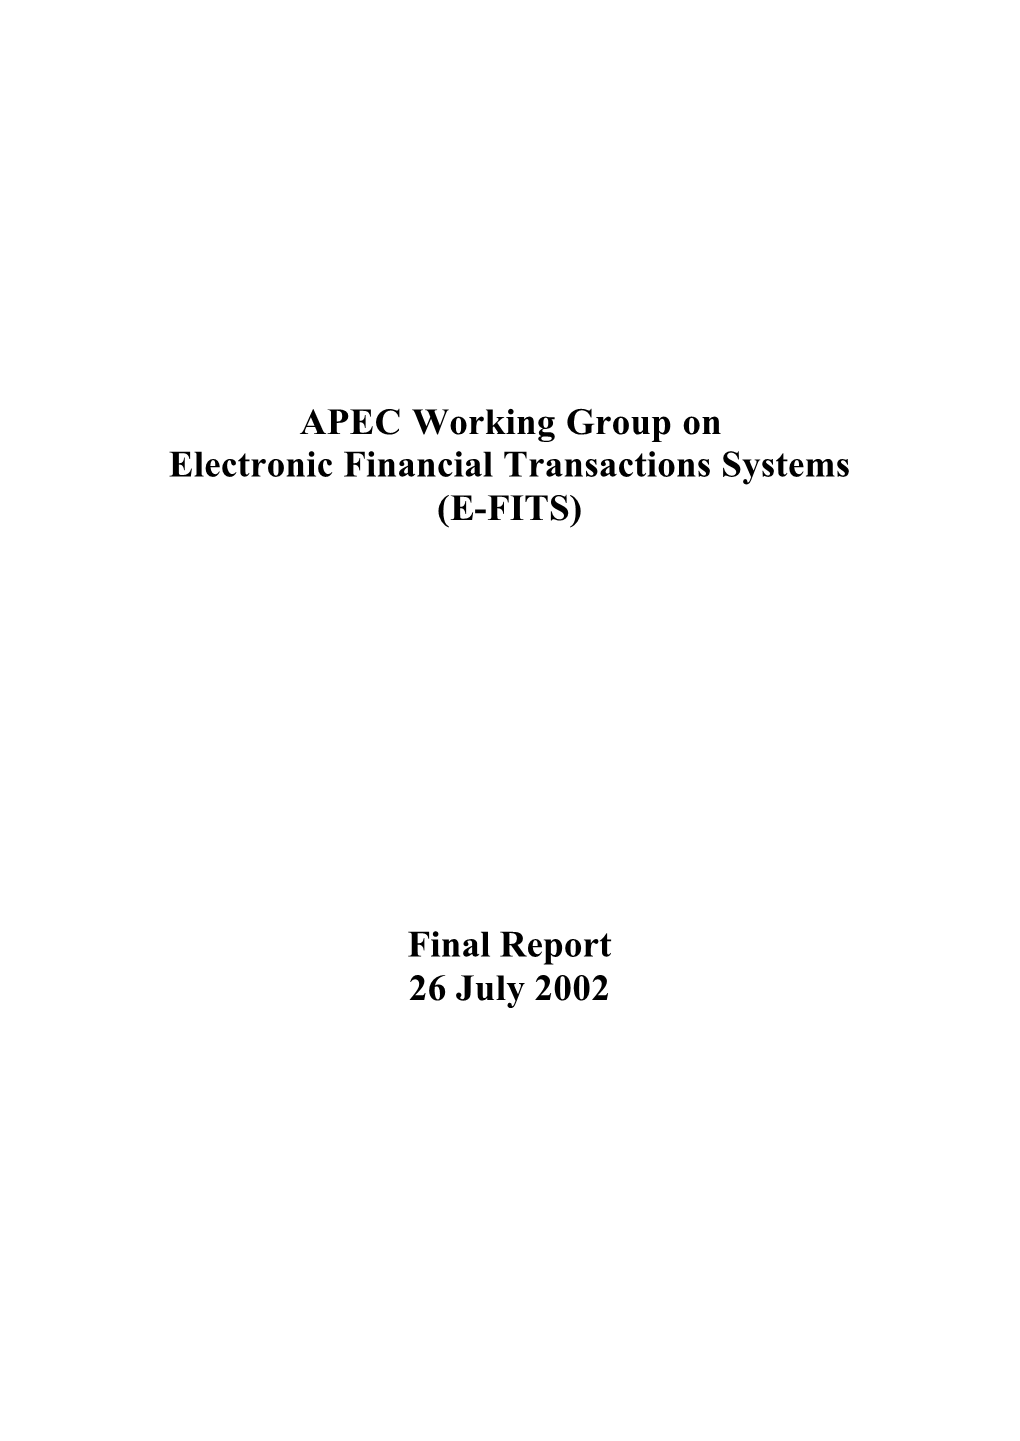 APEC Working Group on Electronic Financial Transactions Systems (E-FITS)